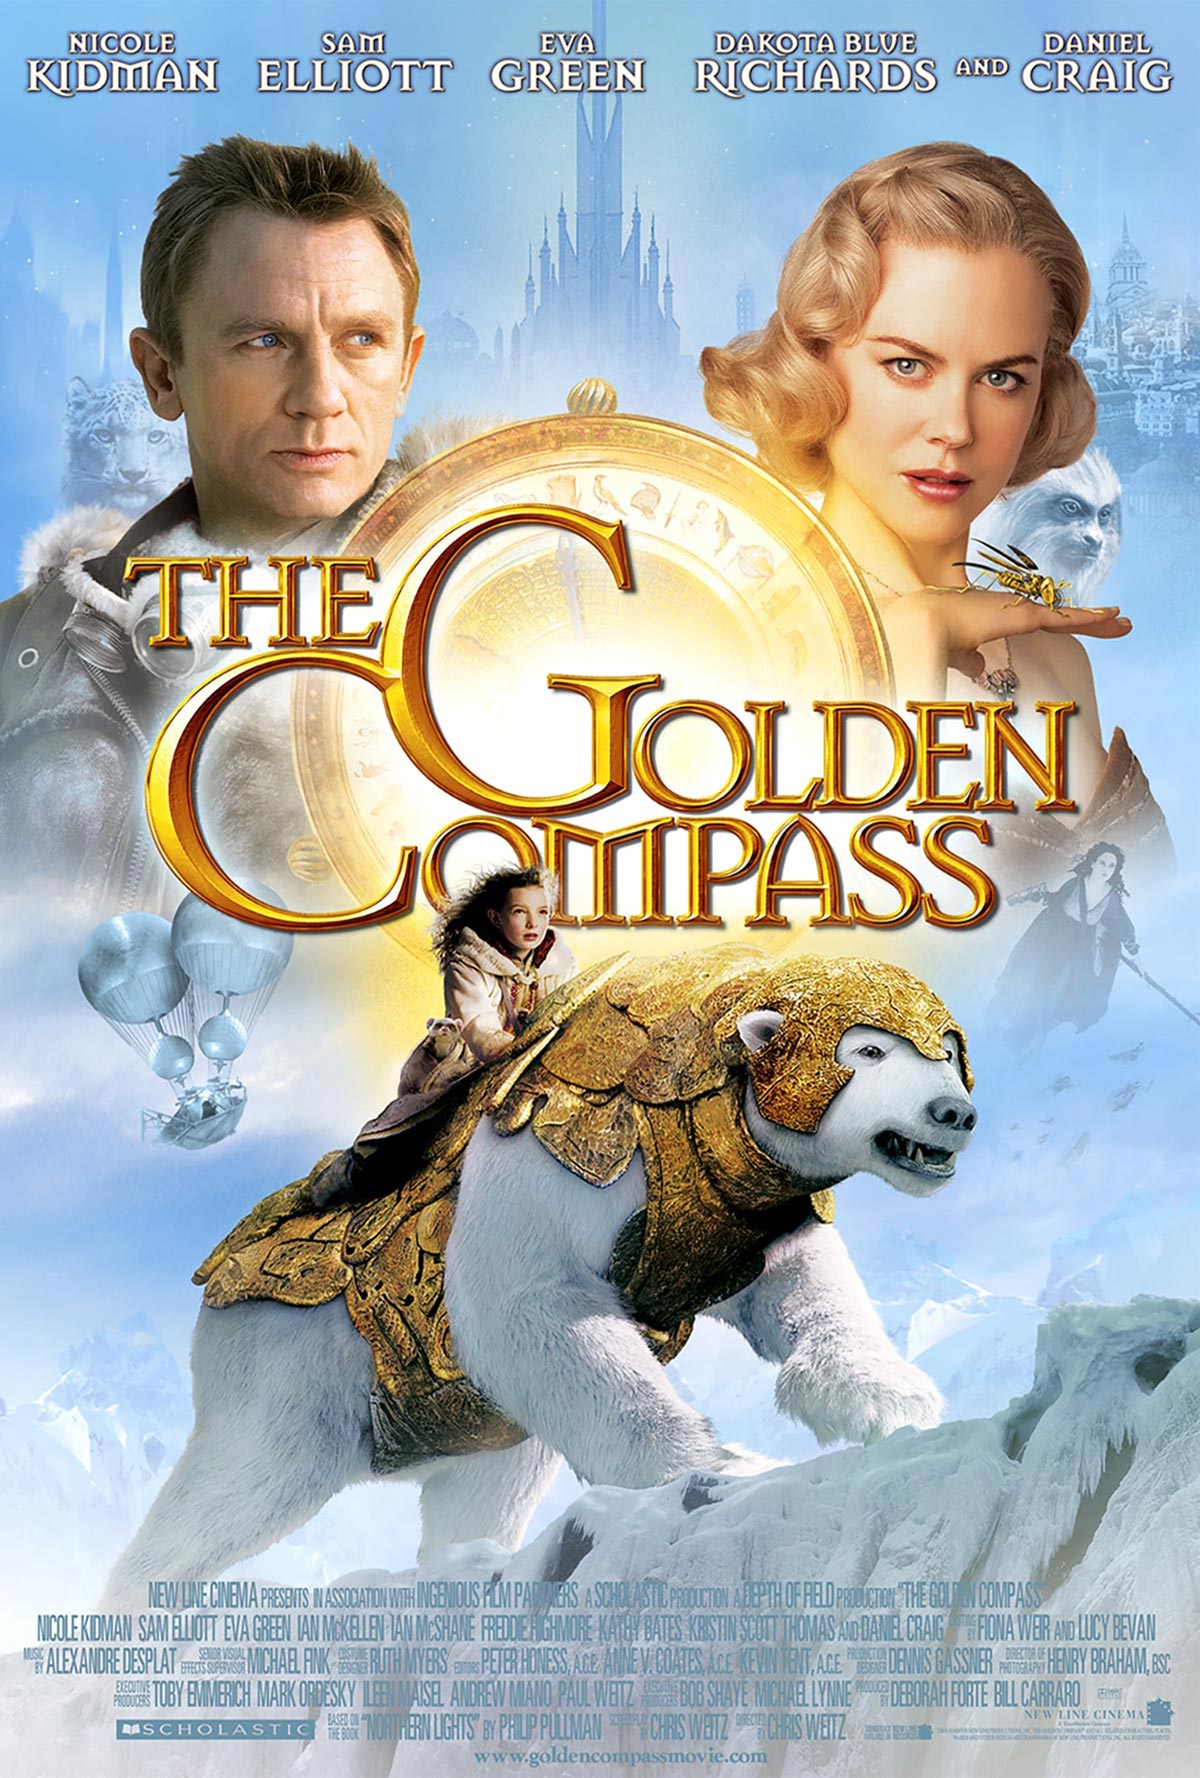 042_dreamogram-iconisus-key-art-movie-poster-the-golden-compass_vertical-cover